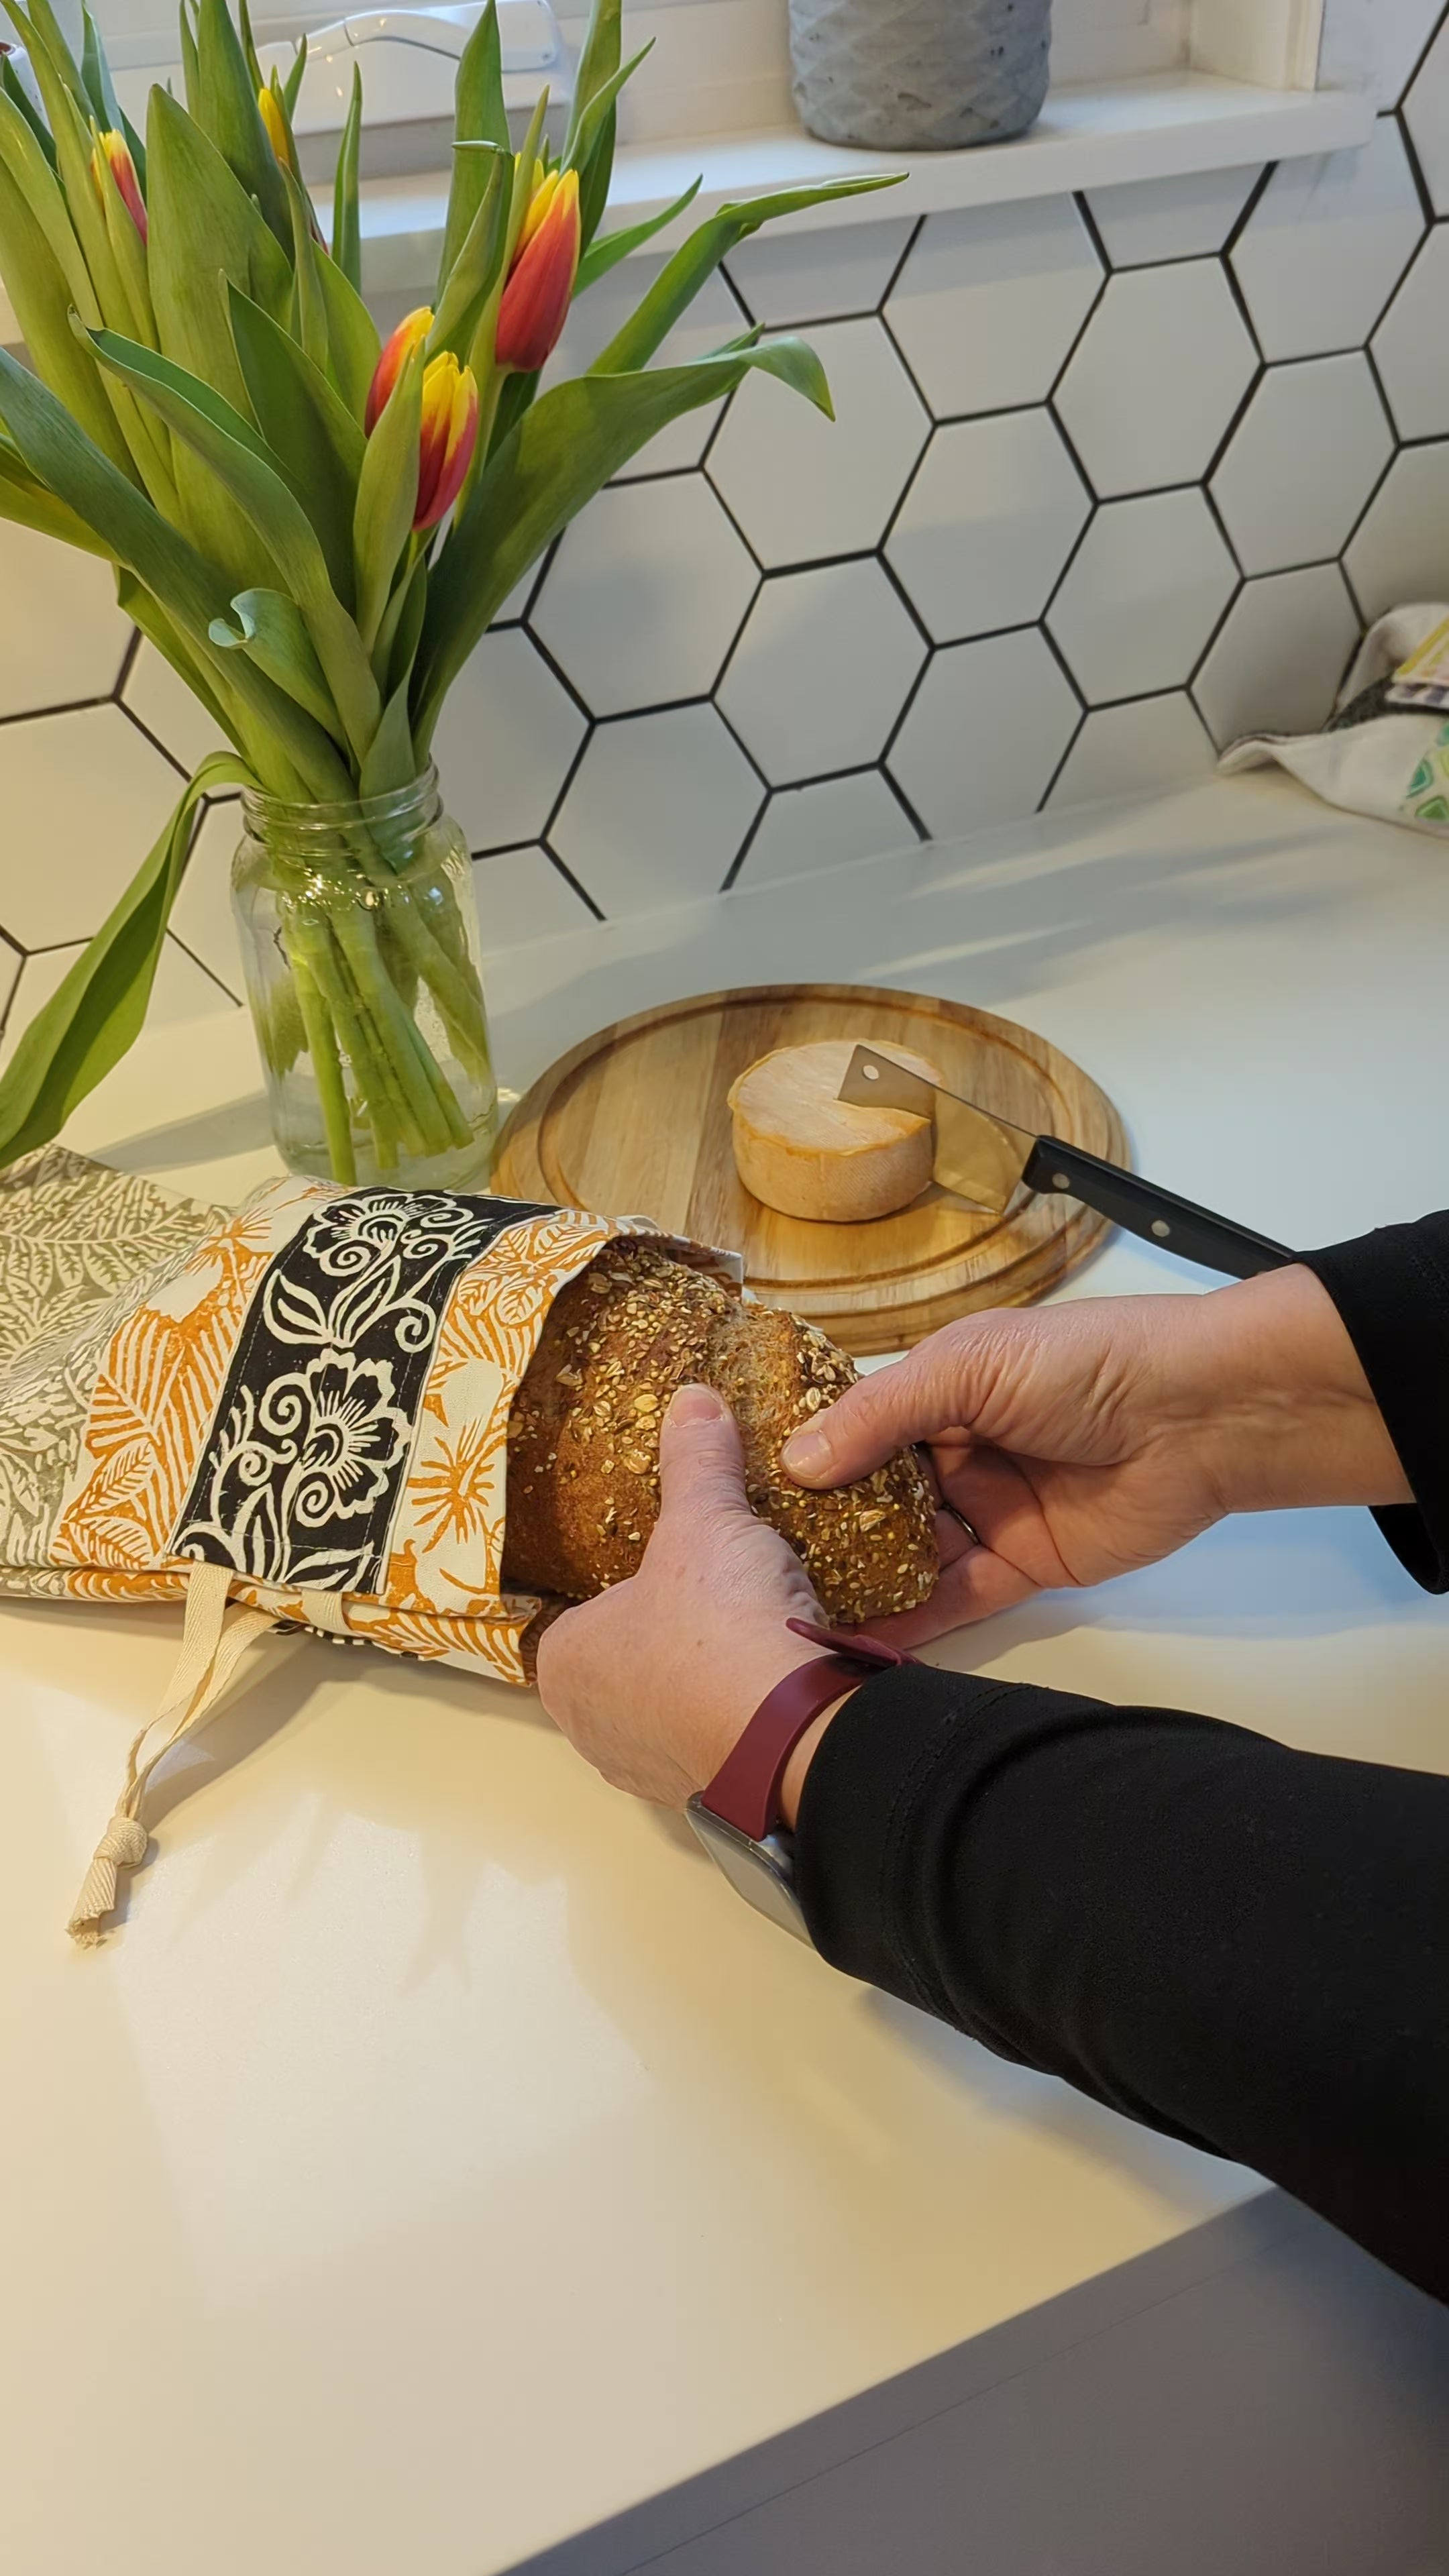 Upcycled Bread Bags